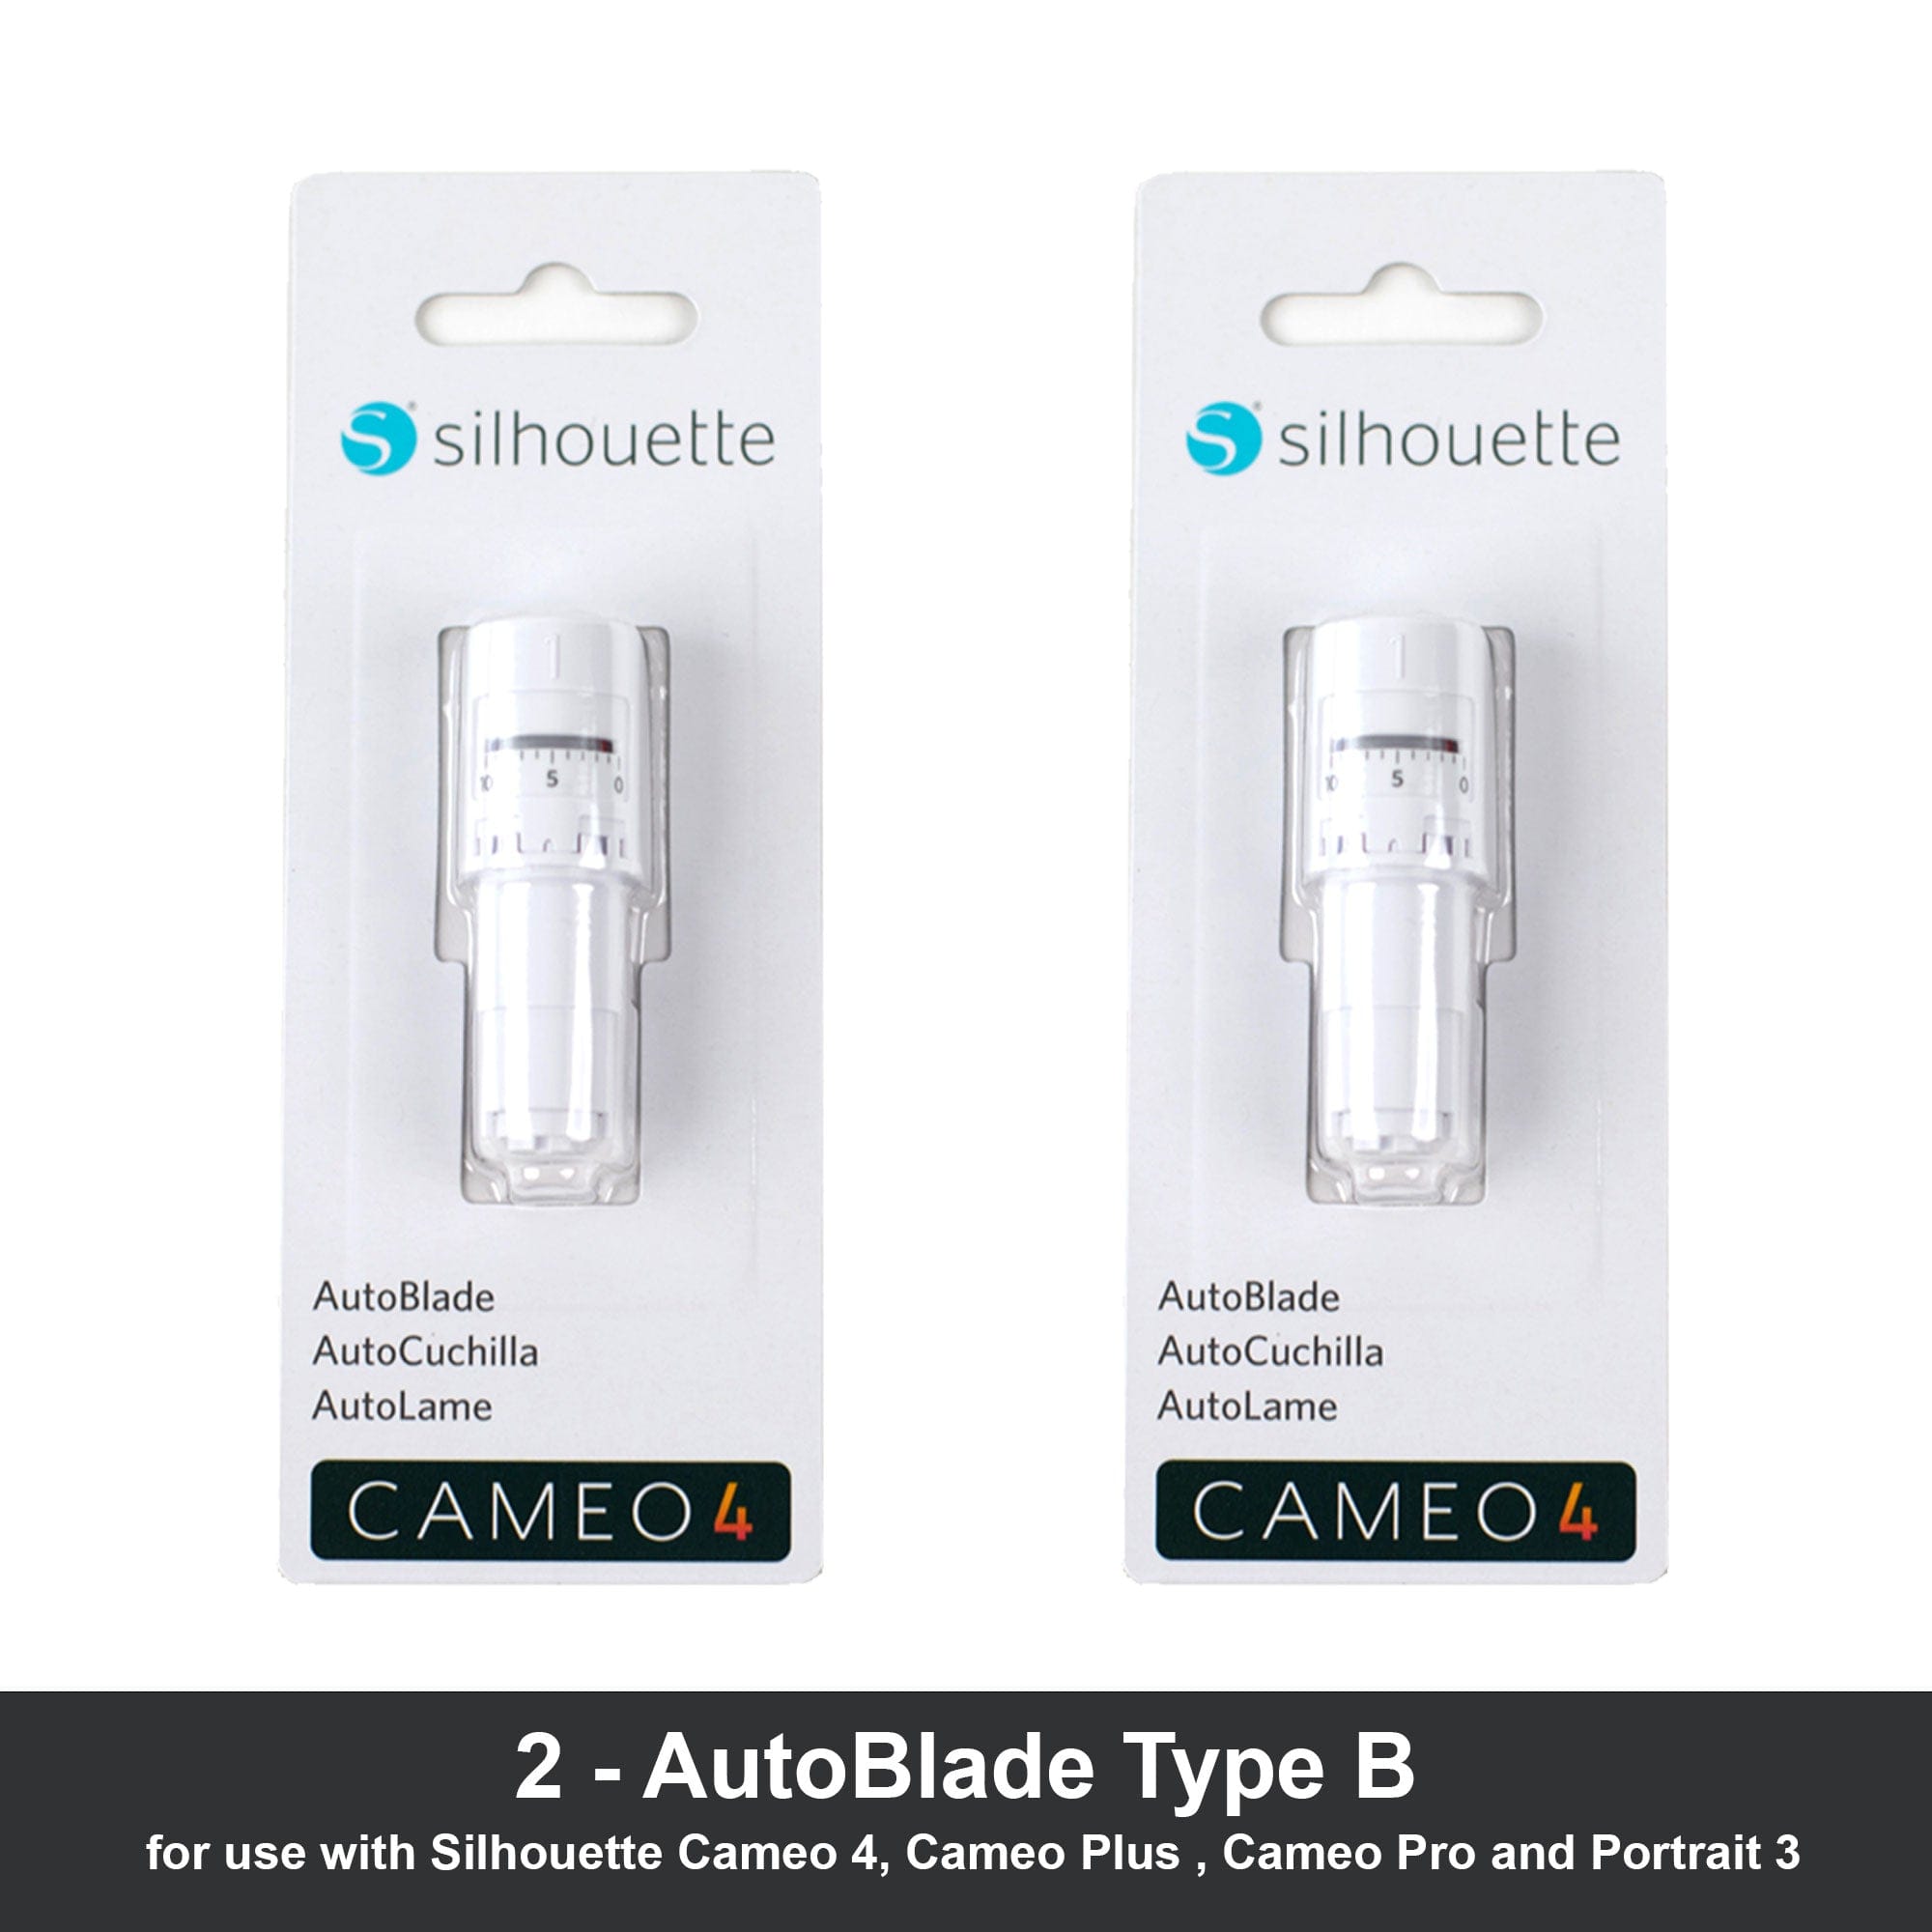 Silhouette Cameo 4 Autoblade and Mat 2 Pack includes: (2) 12 inch